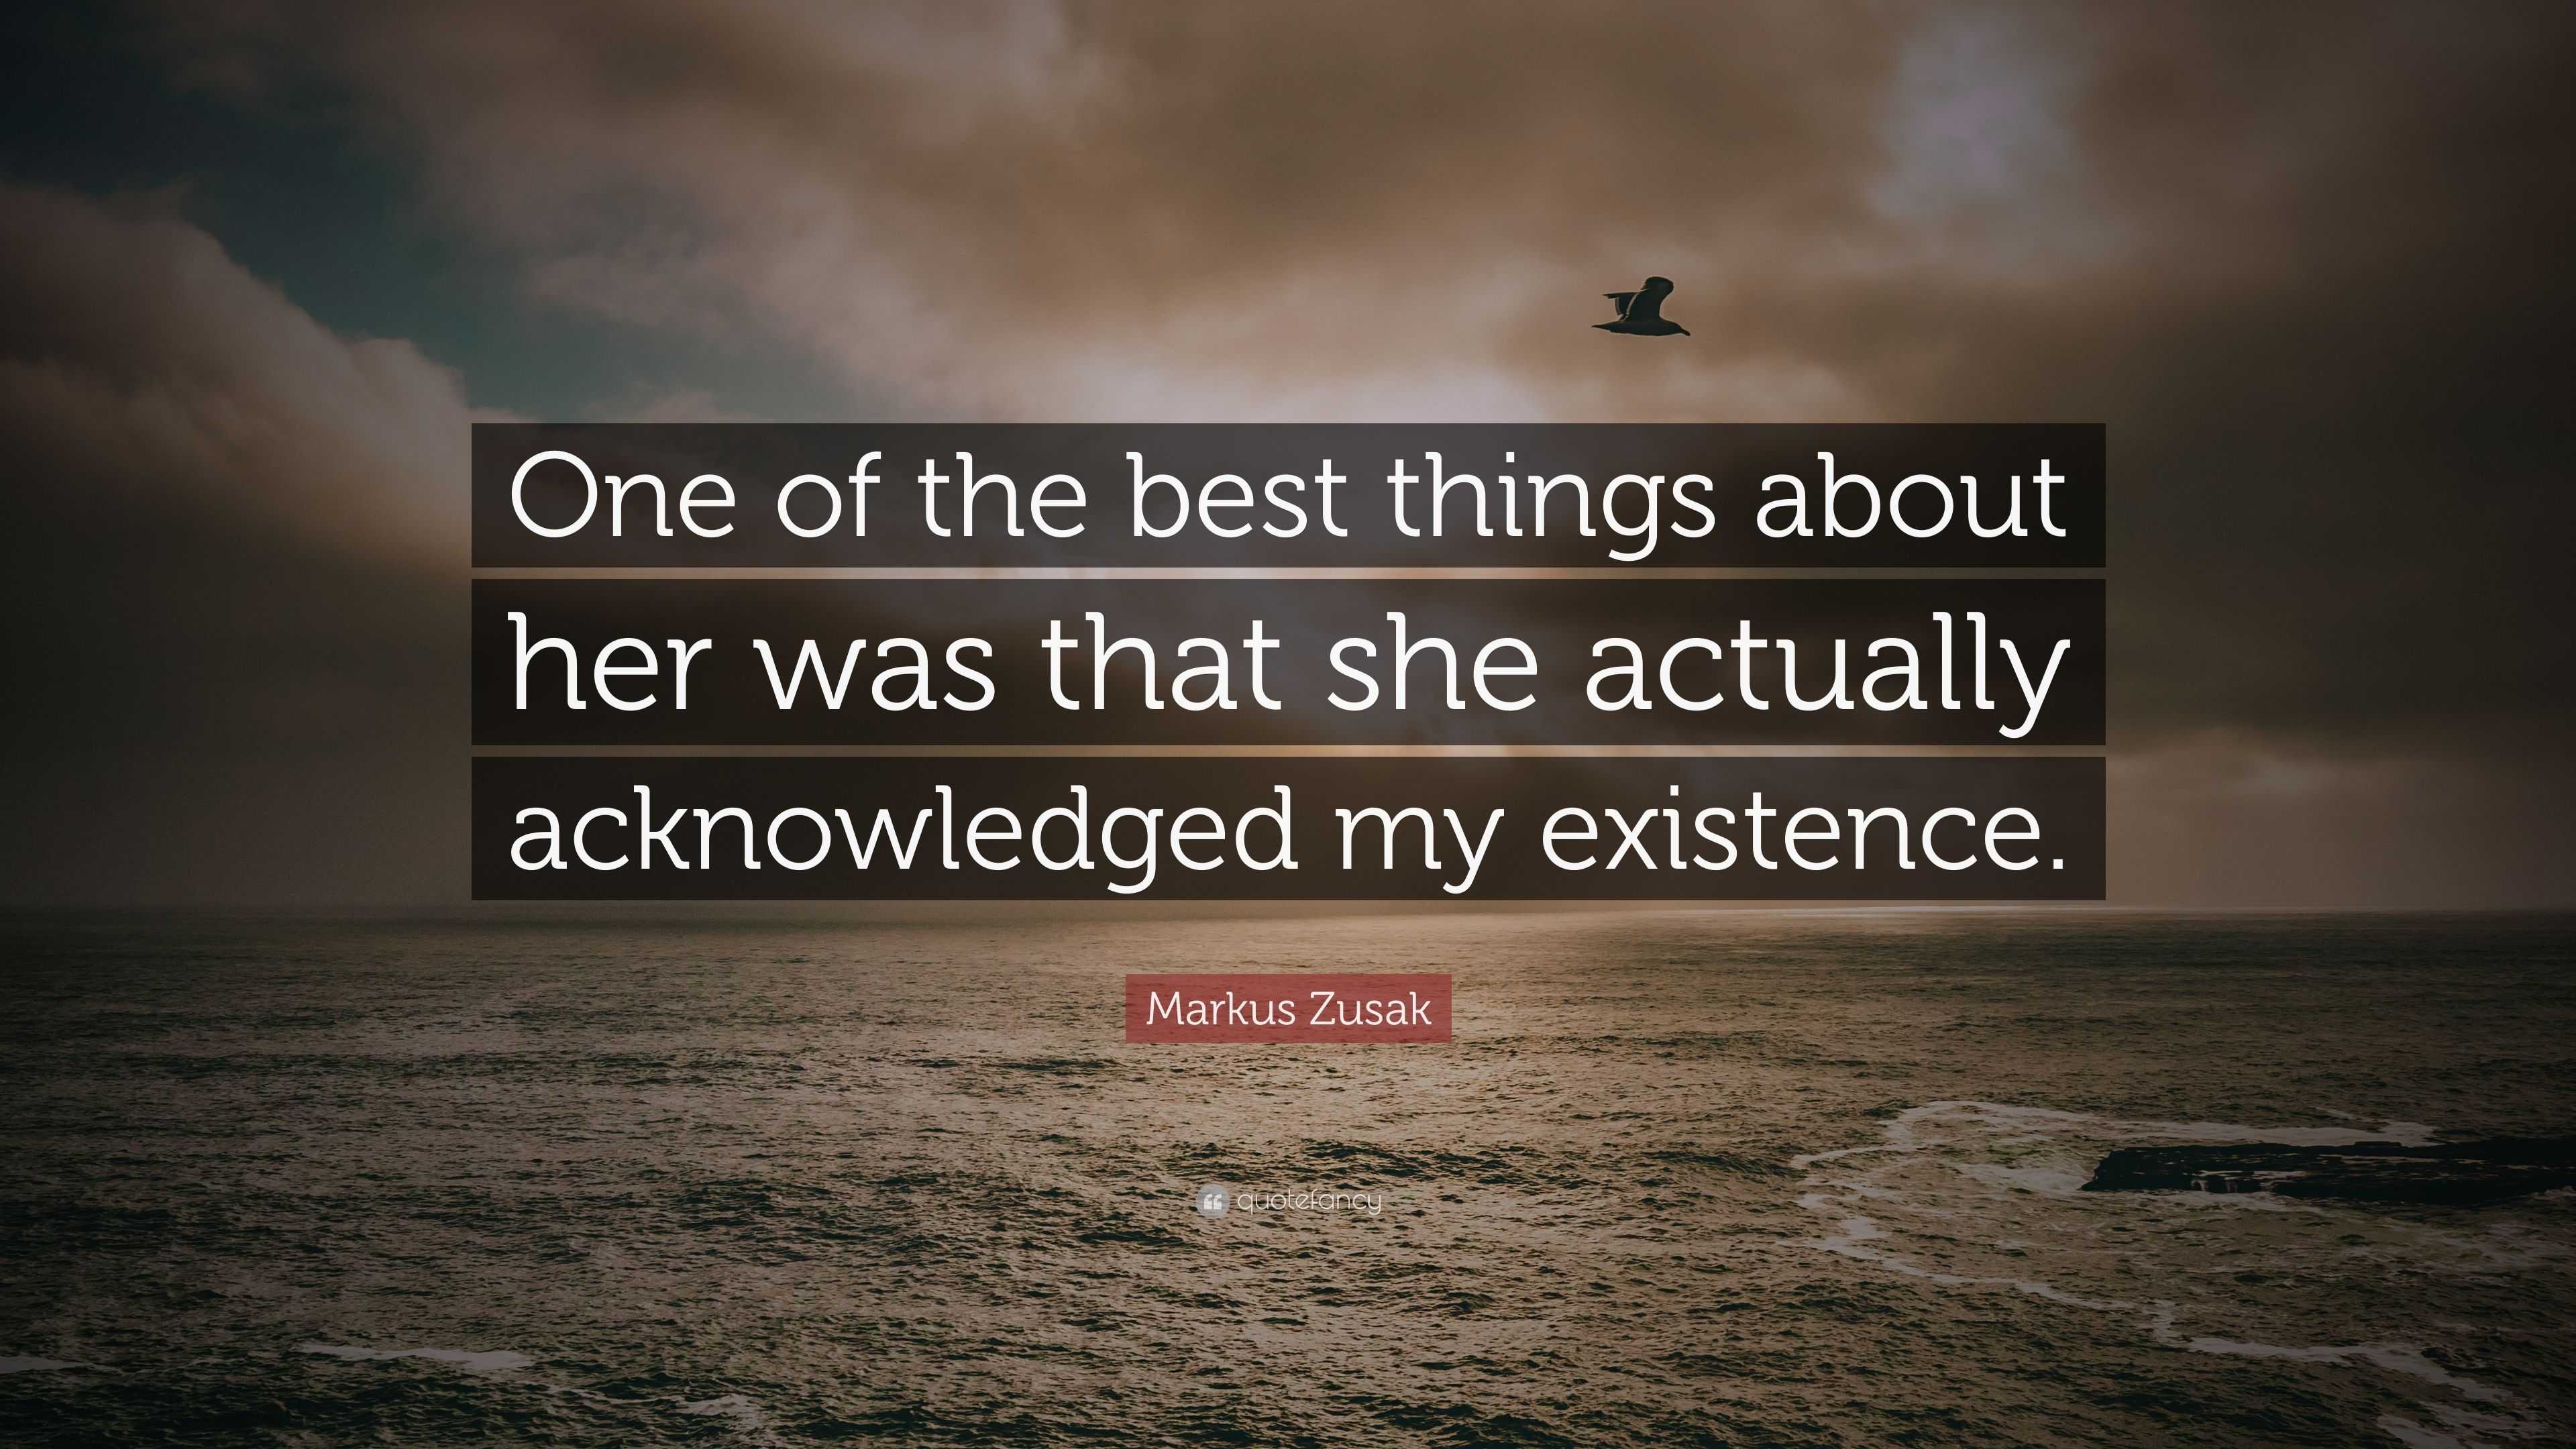 Markus Zusak Quote: “One of the best things about her was that she ...